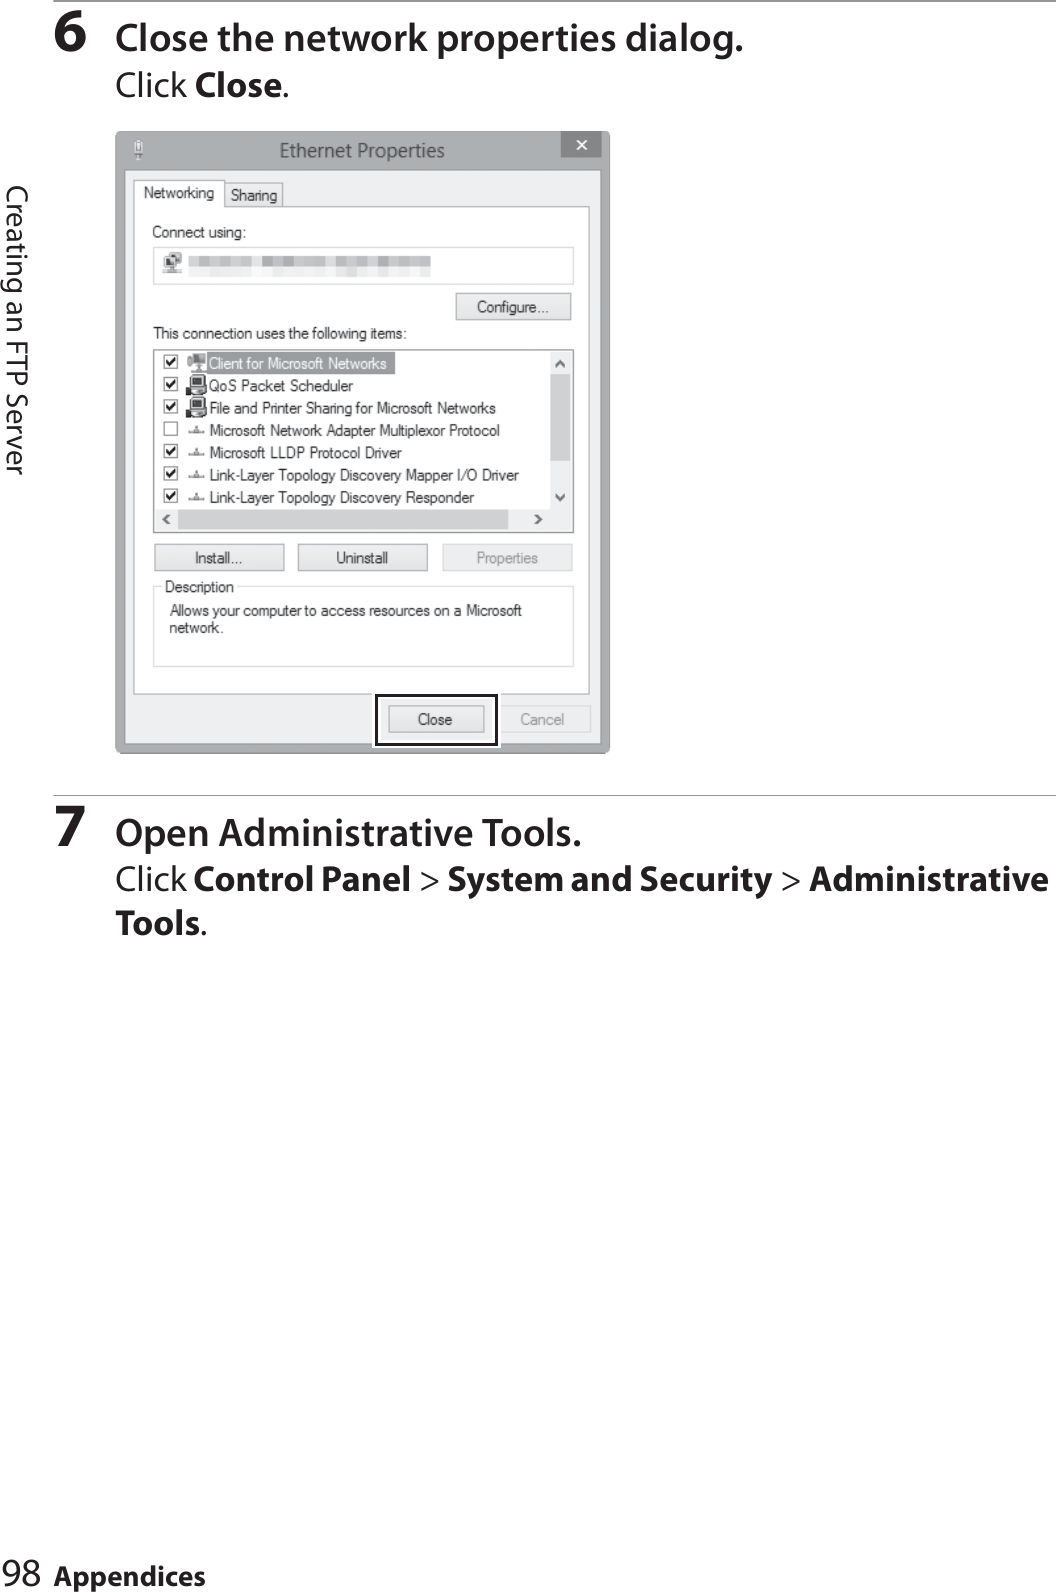 98 AppendicesCreating an FTP Server6Close the network properties dialog.Click Close.7Open Administrative Tools.Click Control Panel &gt; System and Security &gt; Administrative Tools.